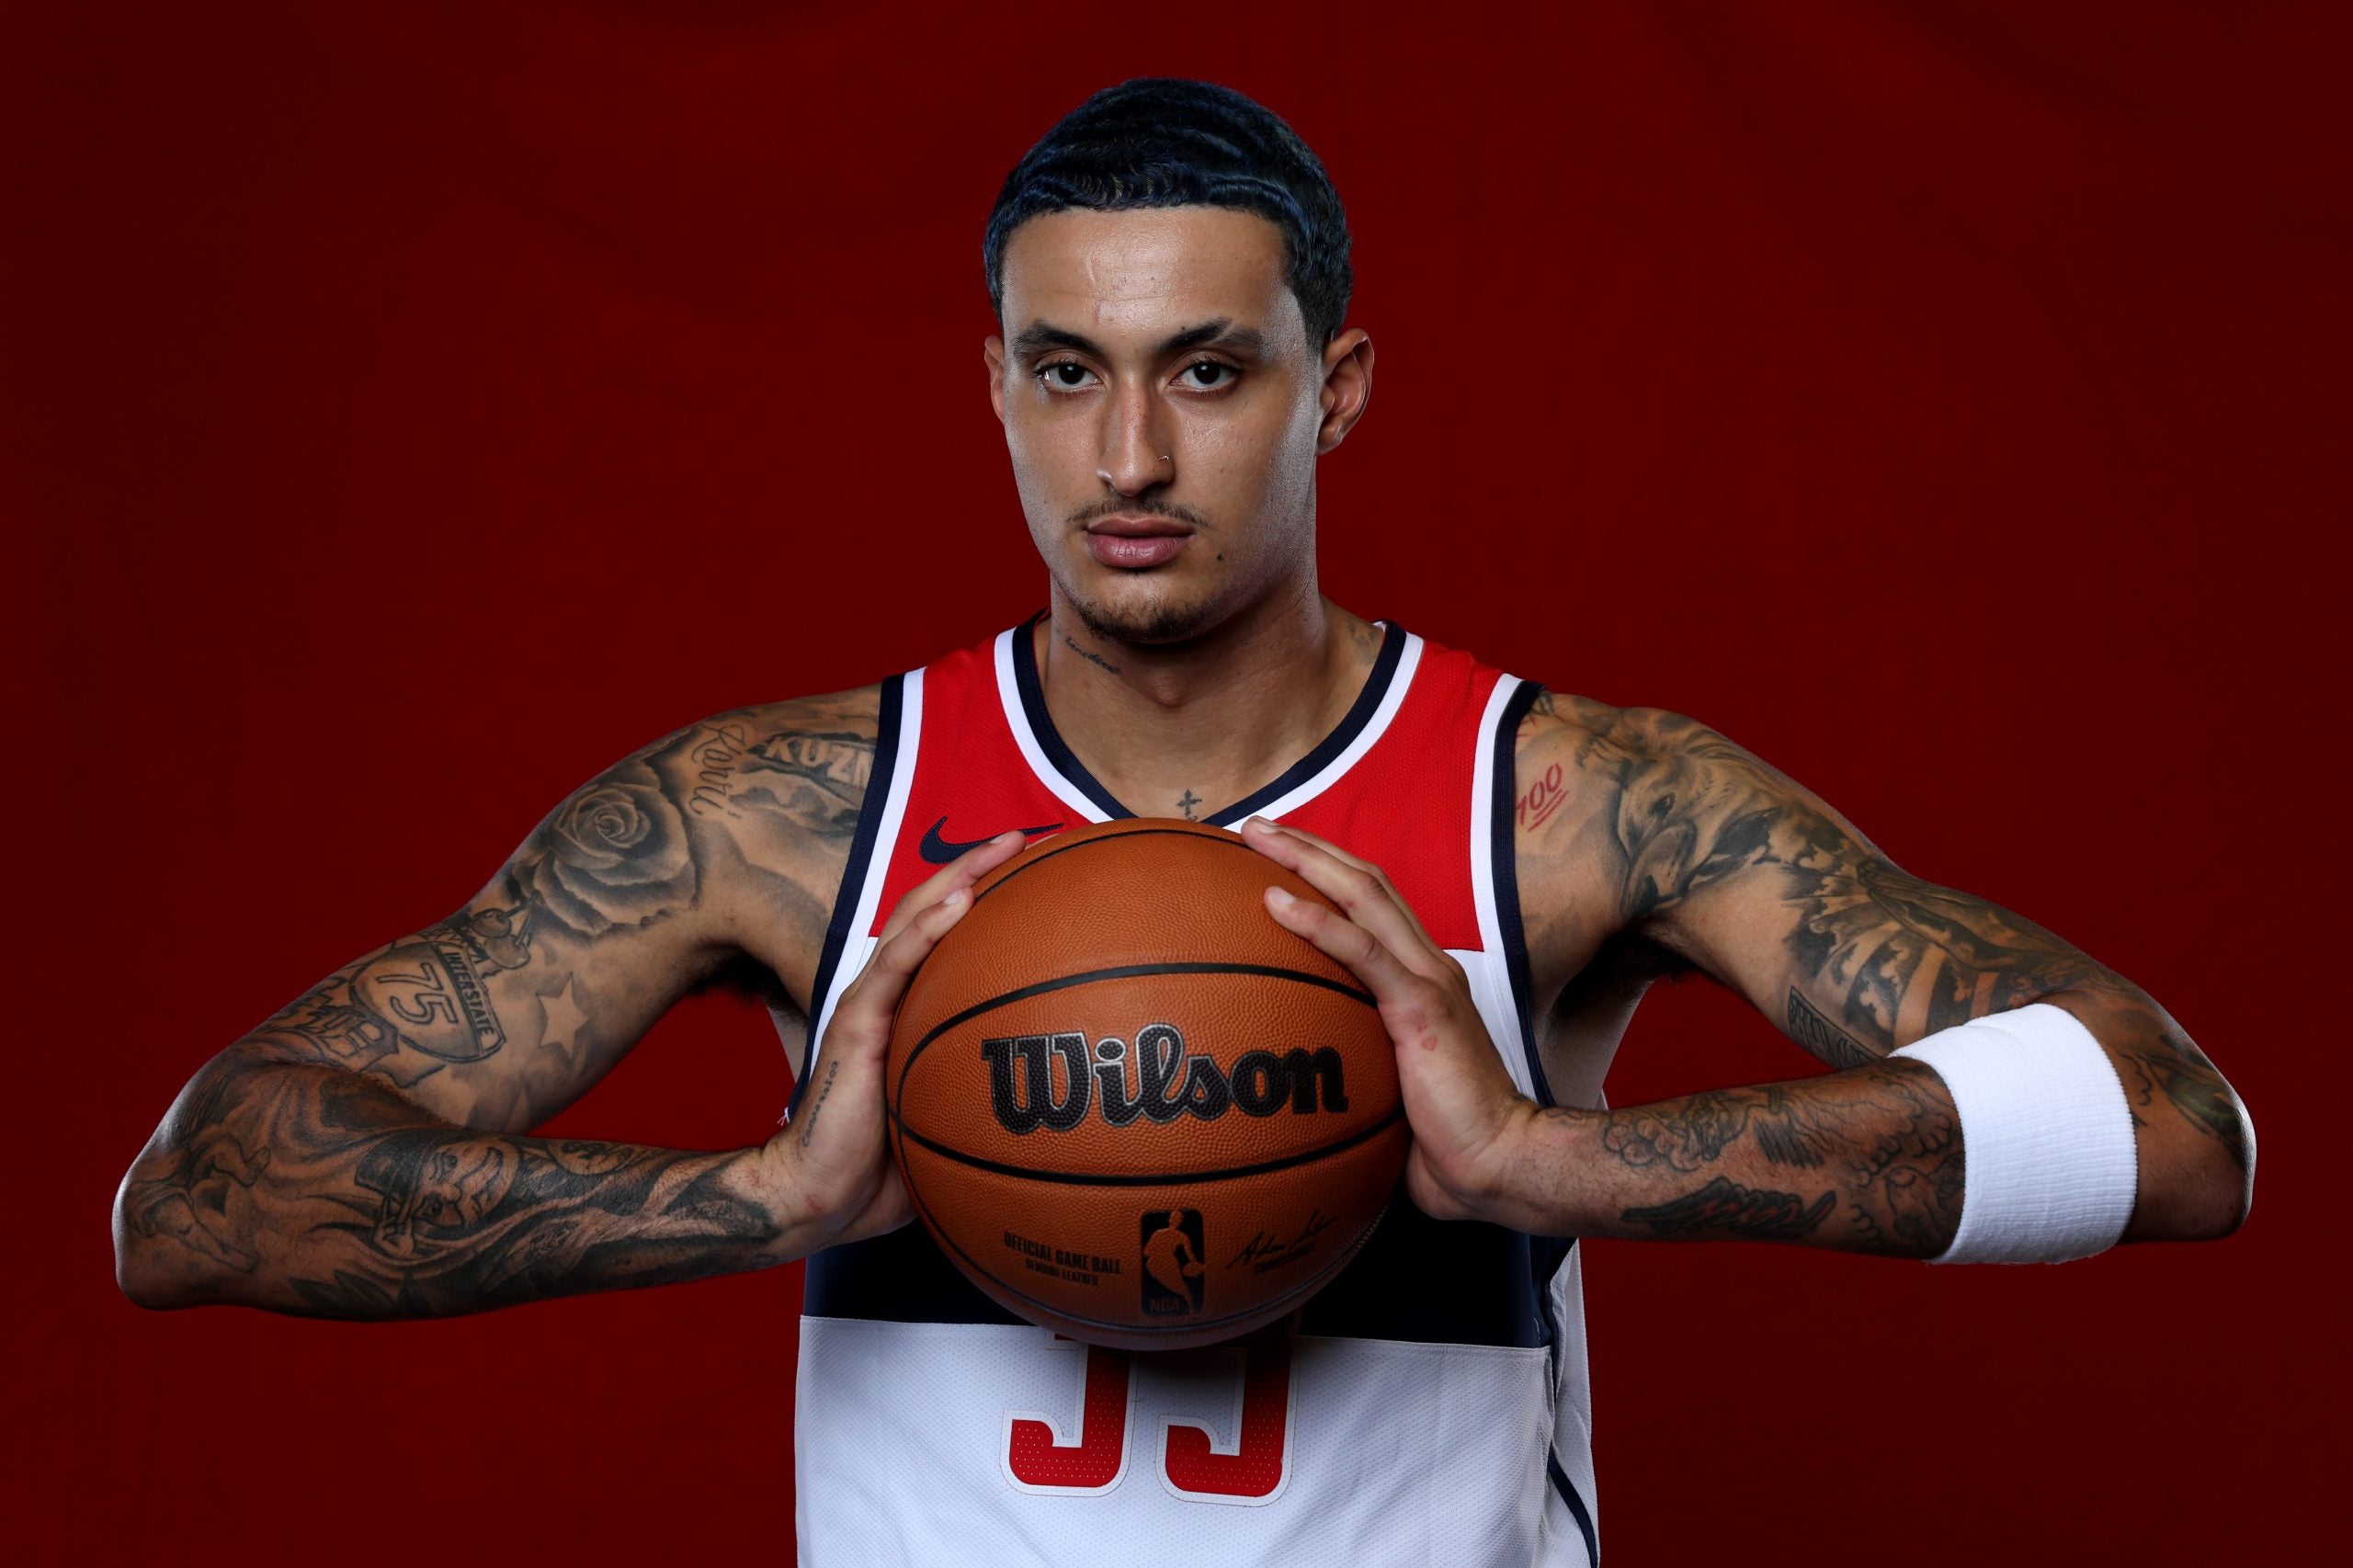 NBA Champ Kyle Kuzma Strikes Major Deal As Health Eatery Franchise Owner—Plans To Expand To 35 Stores